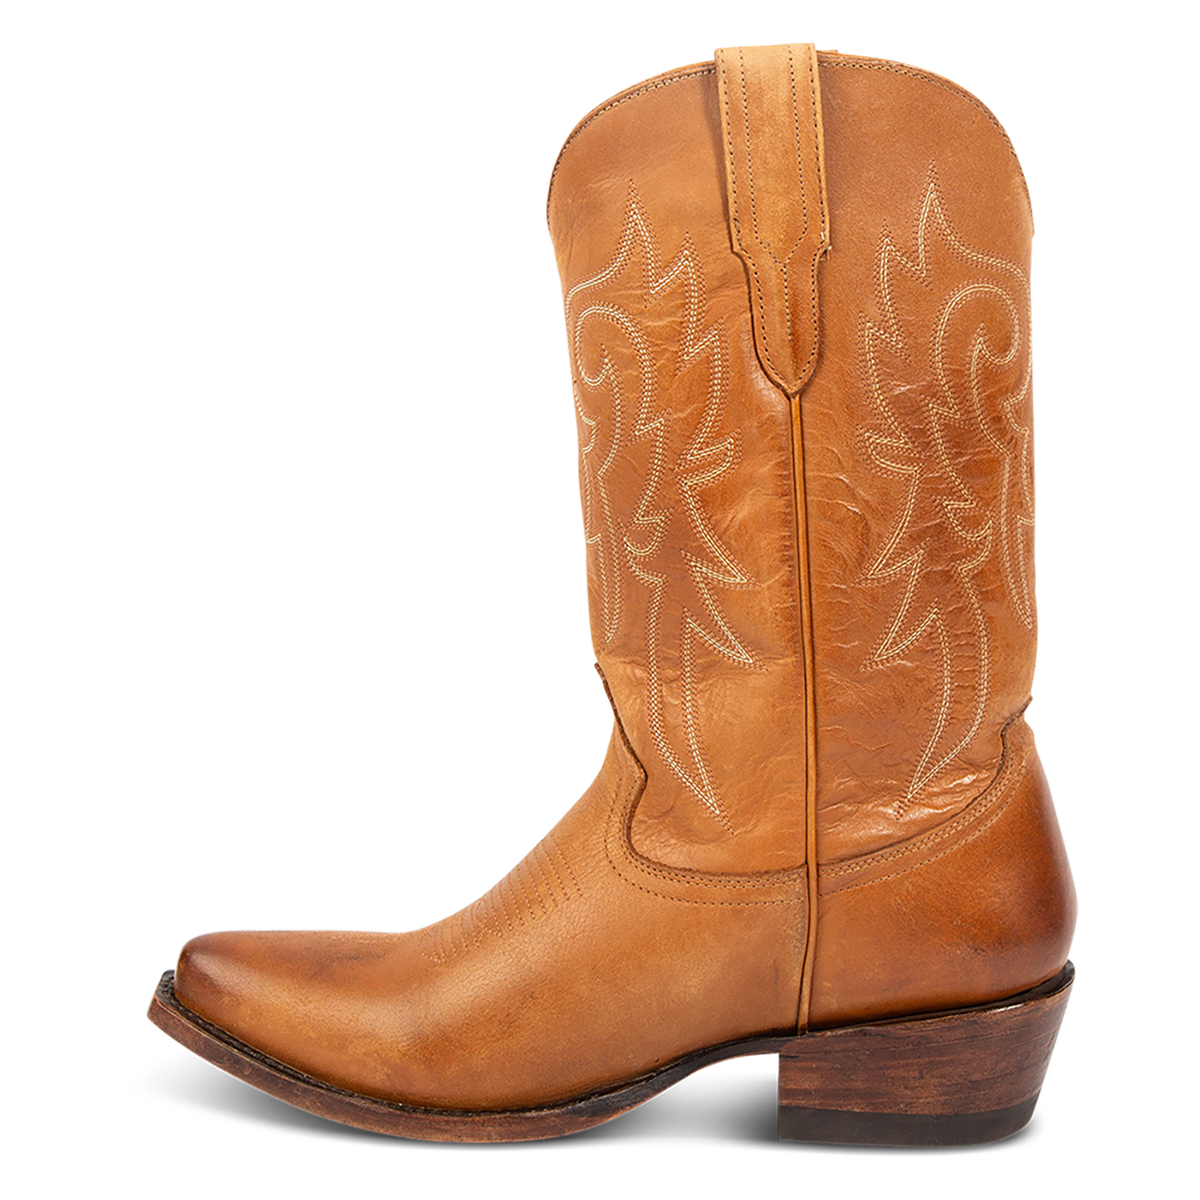 Inside view showing FREEBIRD men's Marshall whiskey leather western cowboy boot with shaft stitch detailing, snip toe construction and leather pull straps